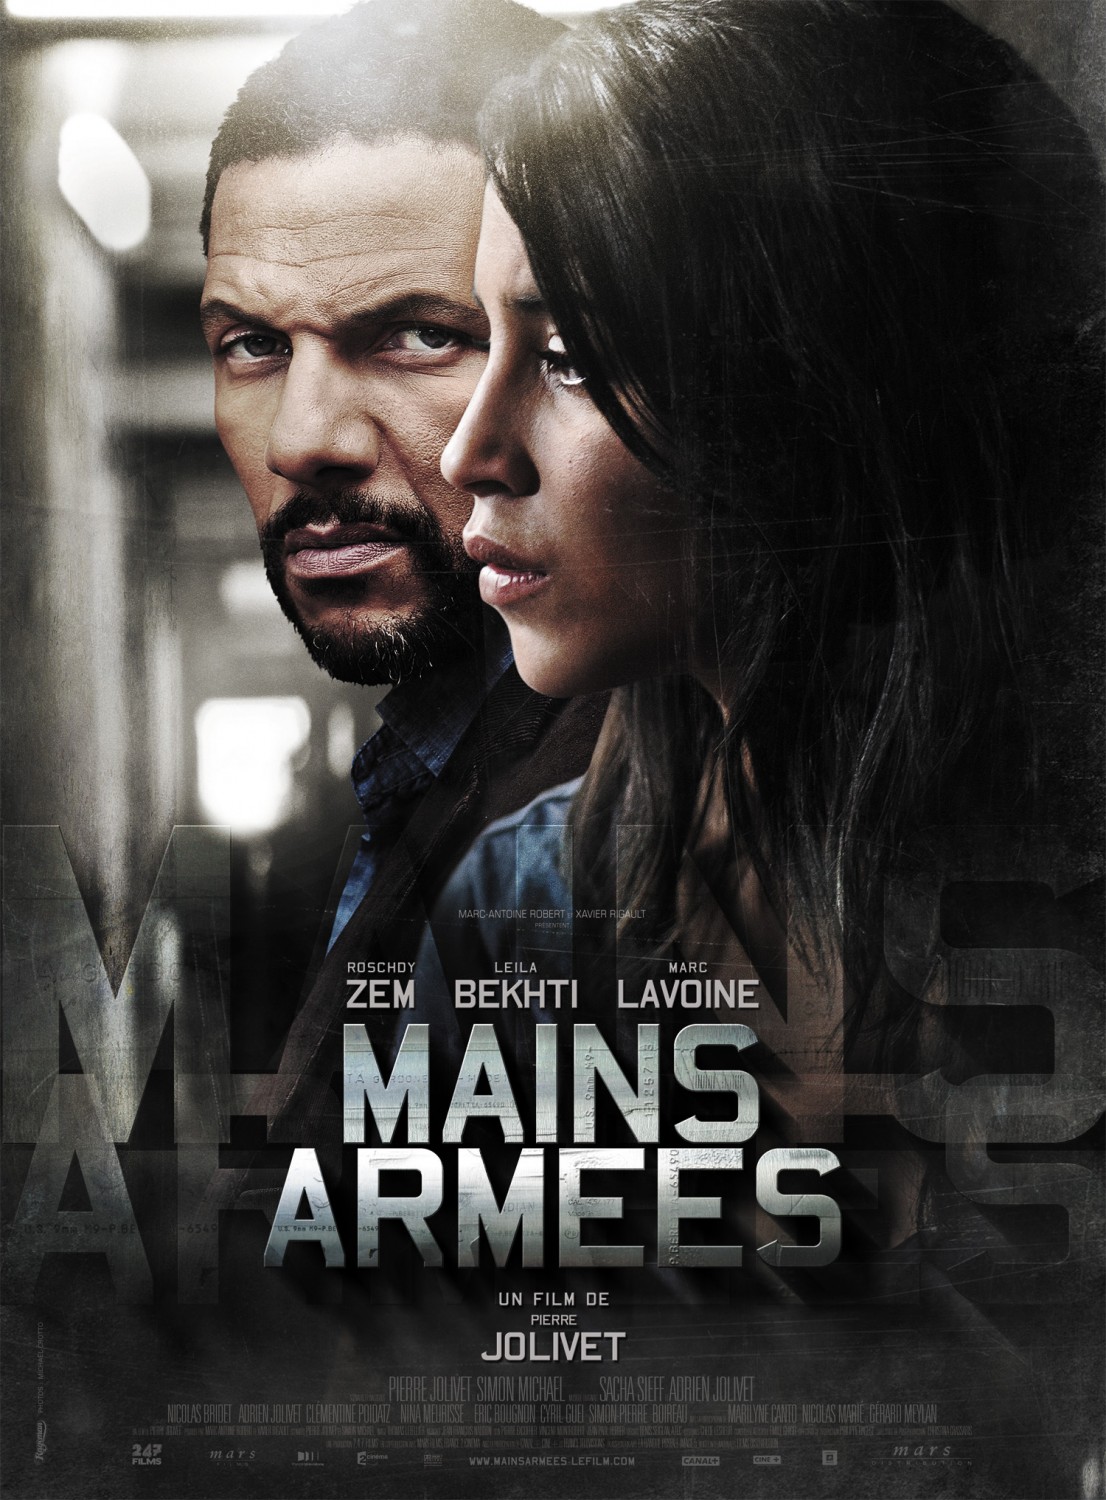 Extra Large Movie Poster Image for Mains armées (#2 of 2)